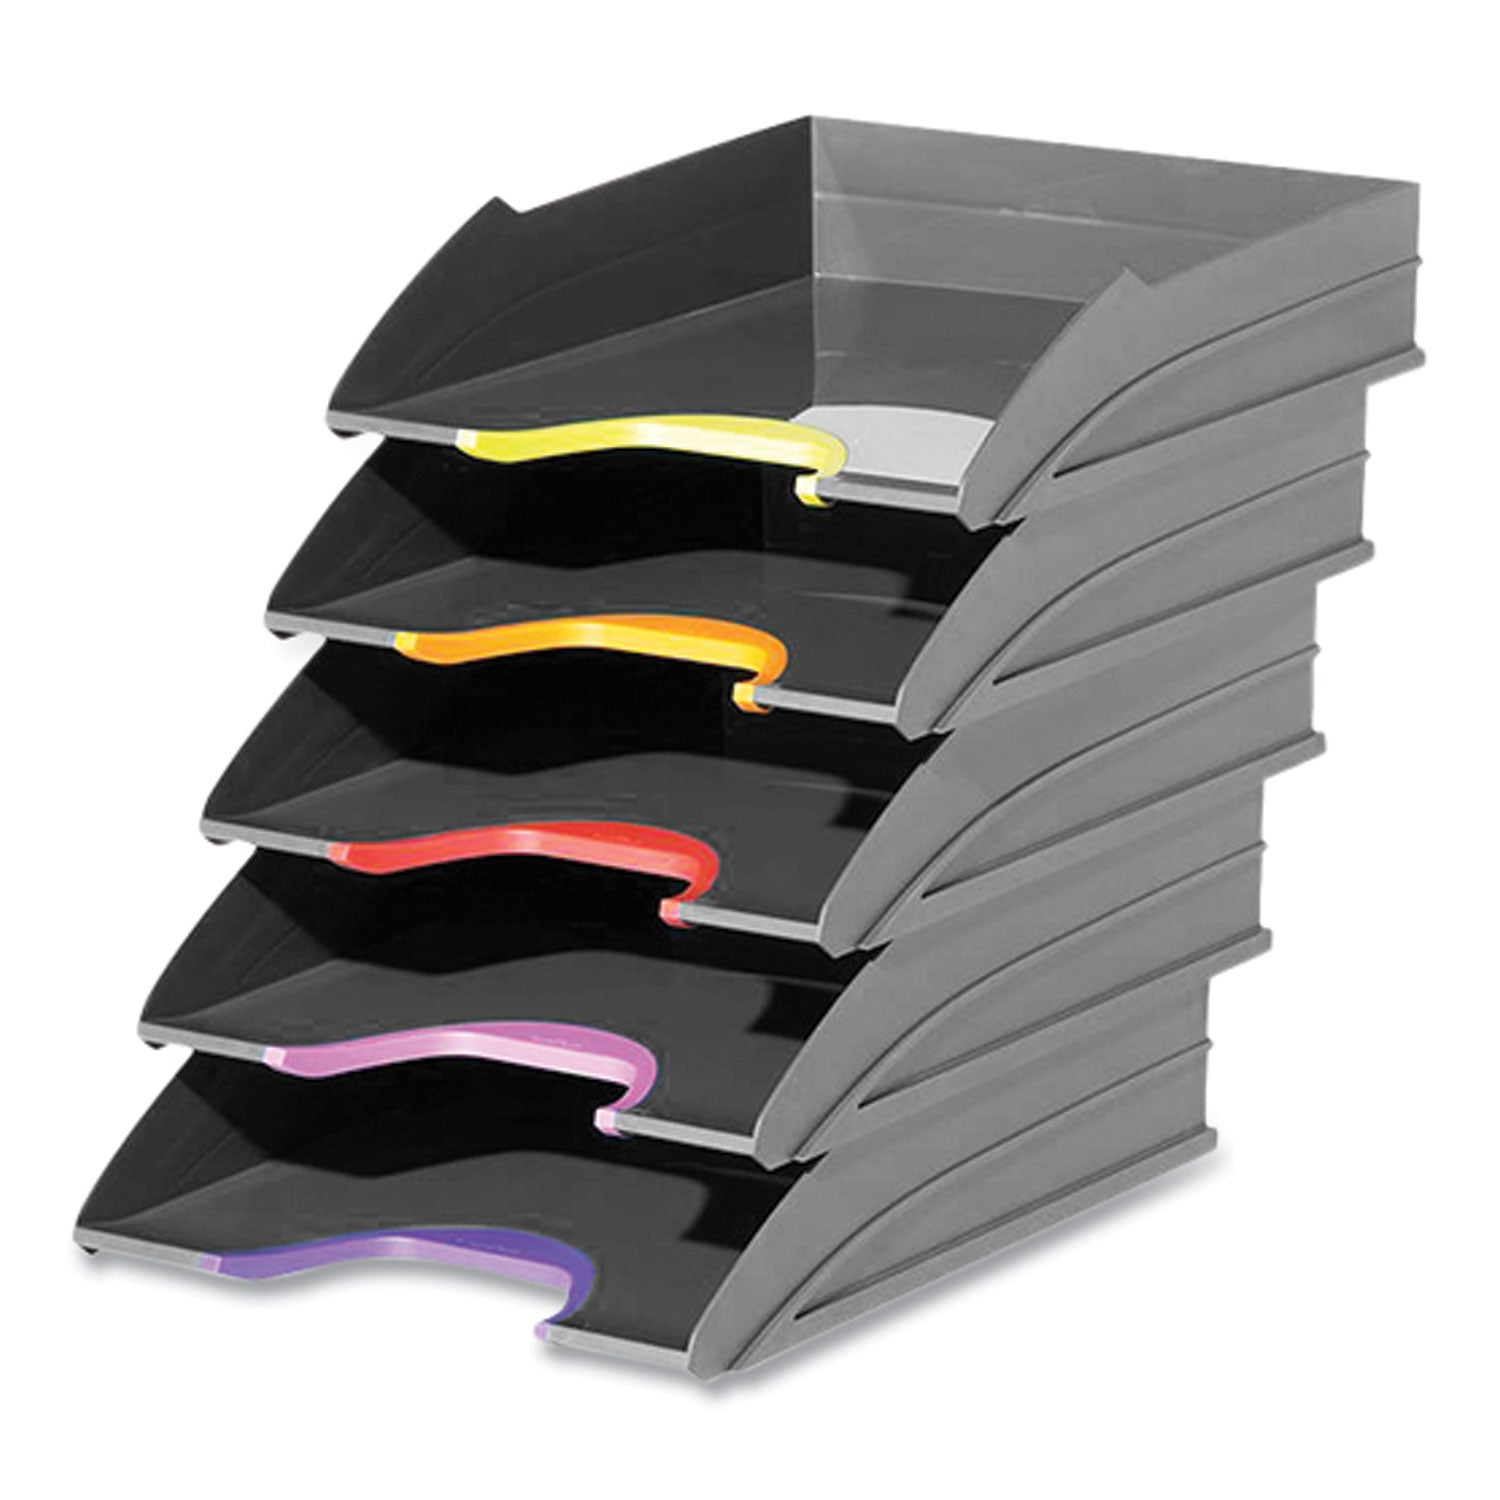 varicolor-5-compartment-stackable-plastic-letter-tray-set-letter-to-folio-size-files-1039-x-1323-x-291-anthracite-gray_dbl770557 - 2